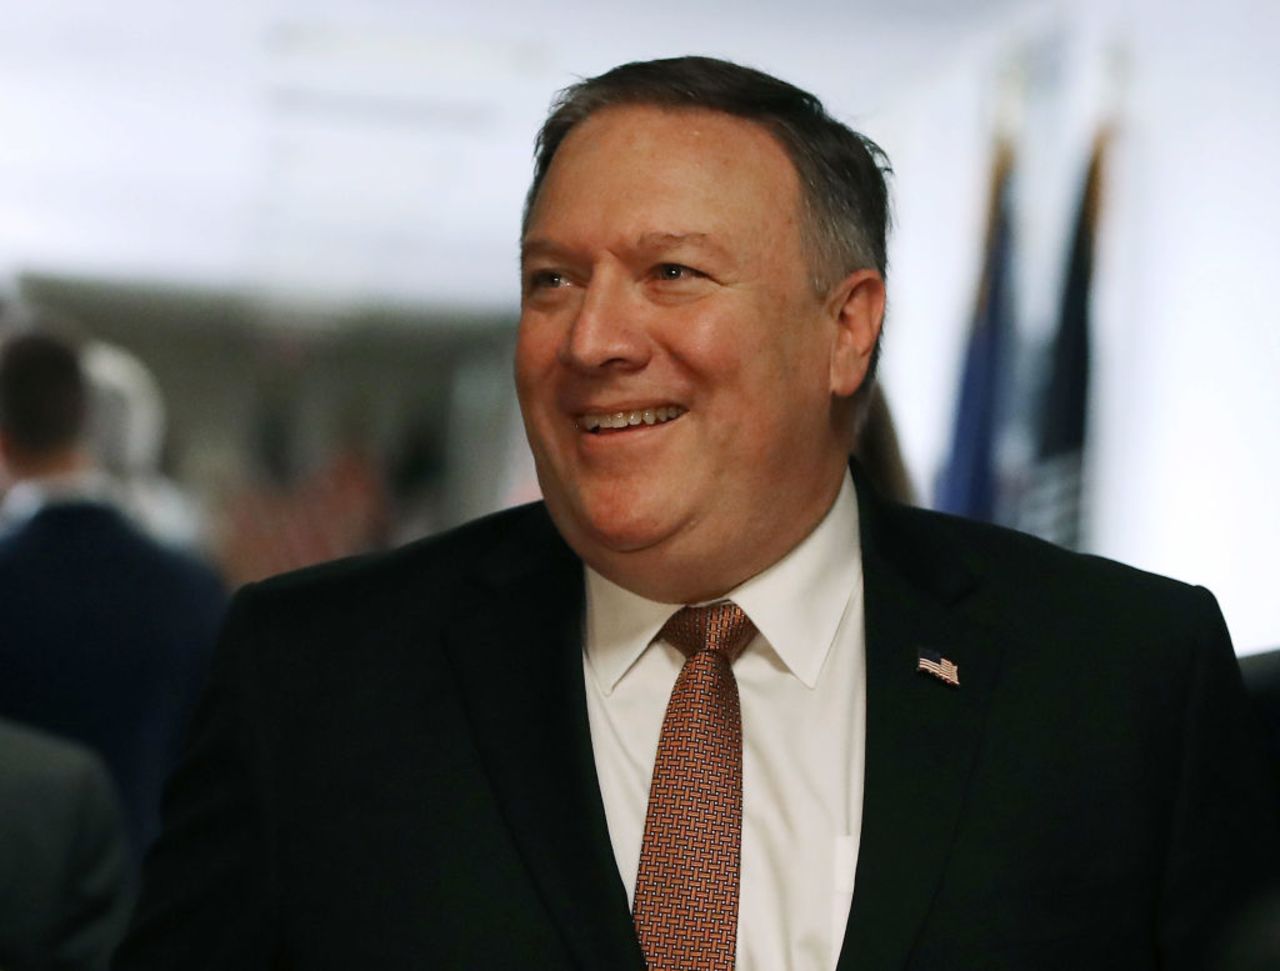 CIA Director Mike Pompeo smiles as he walks to a meeting with Sen. Mark Warner (D-VA) on Capitol Hill on Wednesday in Washington, DC. President Donald Trump has nominated Pompeo to become the next Secretary of State.